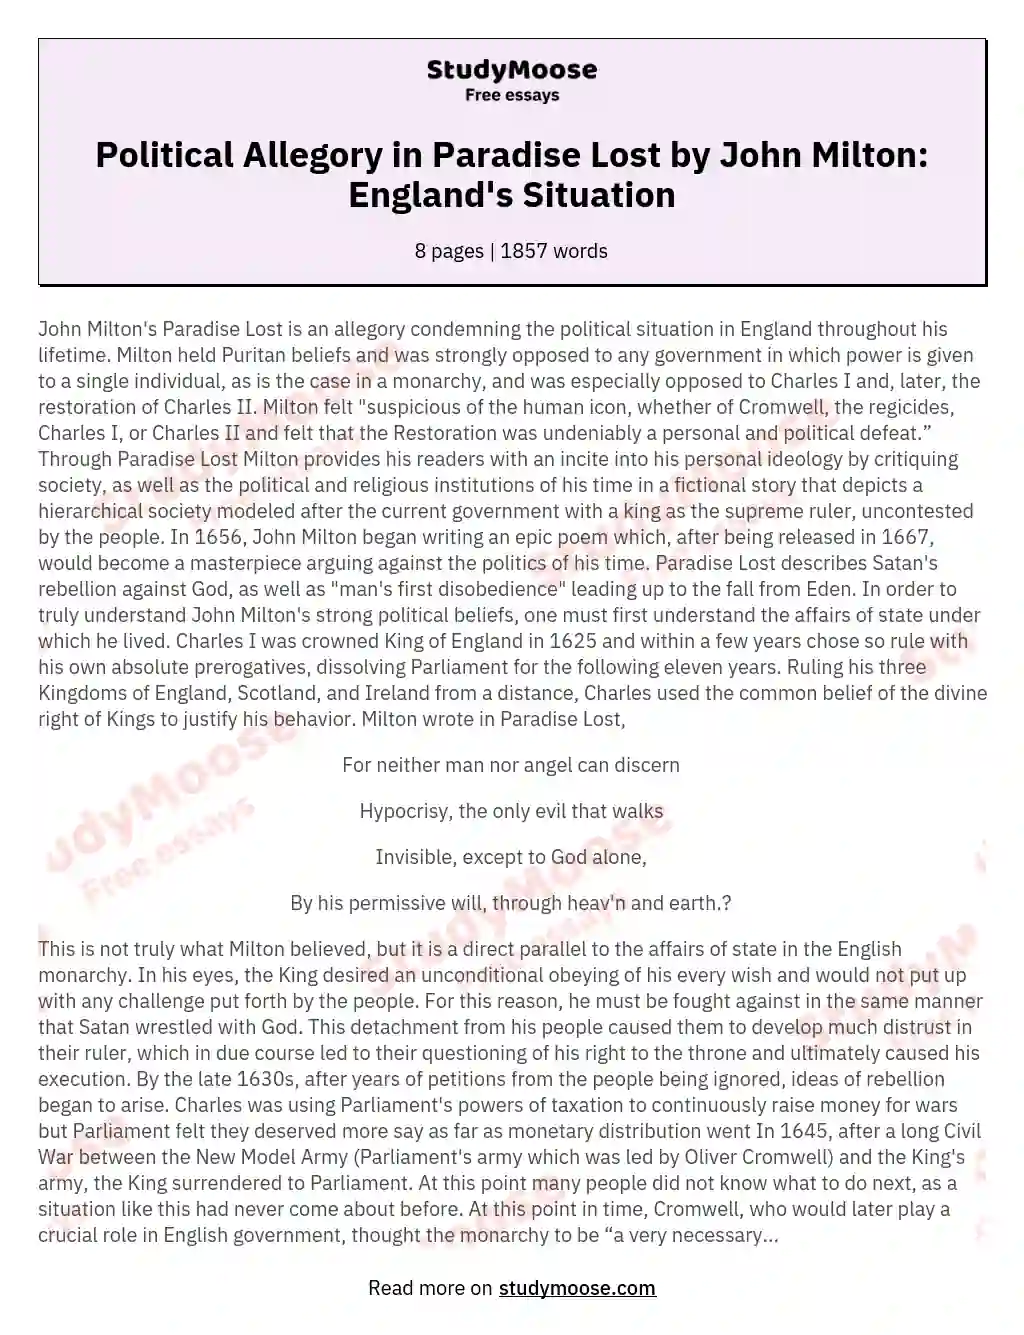 Political Allegory in Paradise Lost by John Milton: England's Situation essay